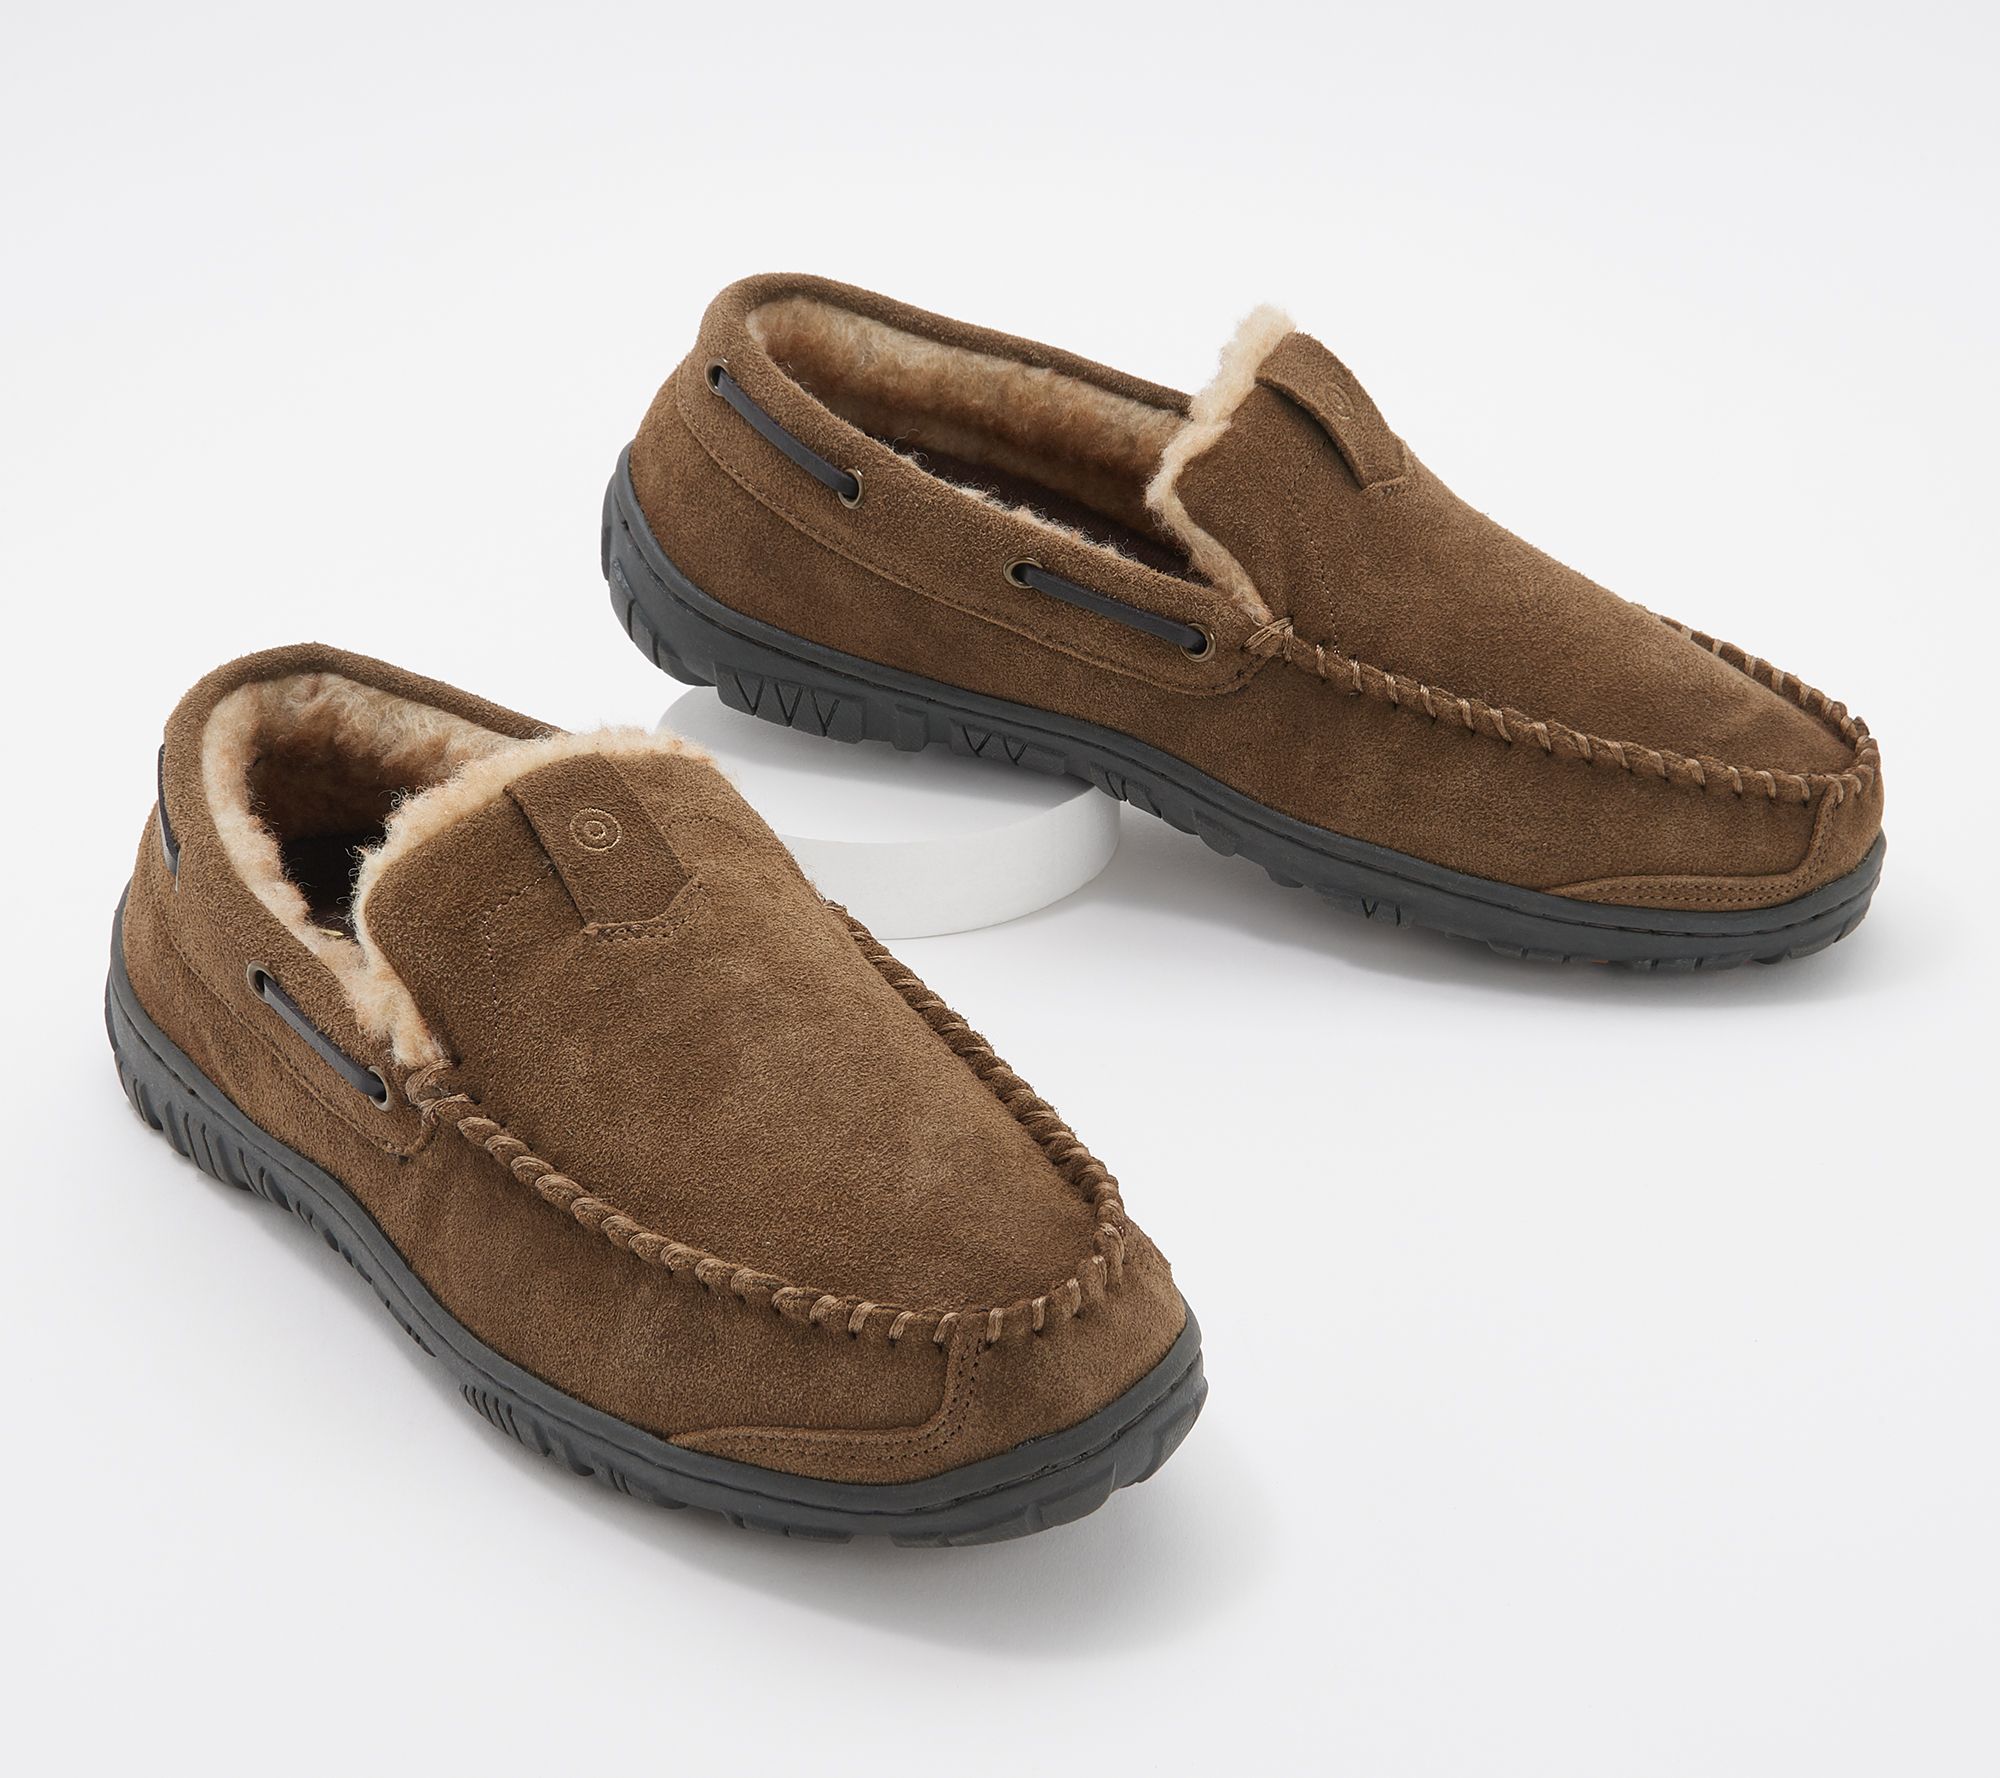 mens slippers at clarks